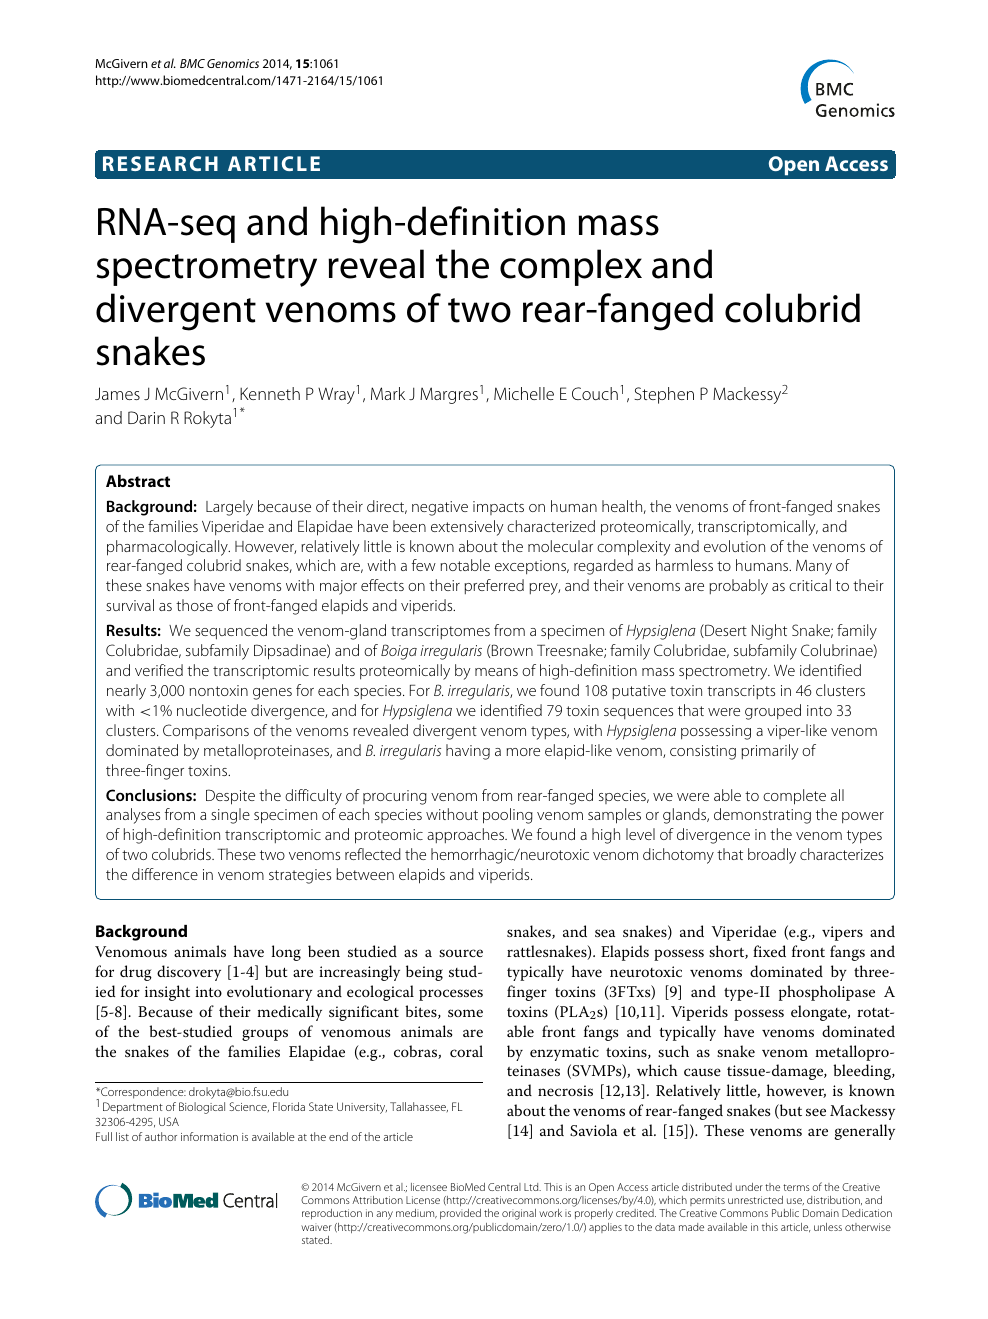 Rna Seq And High Definition Mass Spectrometry Reveal The Complex And Divergent Venoms Of Two Rear Fanged Colubrid Snakes Topic Of Research Paper In Biological Sciences Download Scholarly Article Pdf And Read For Free